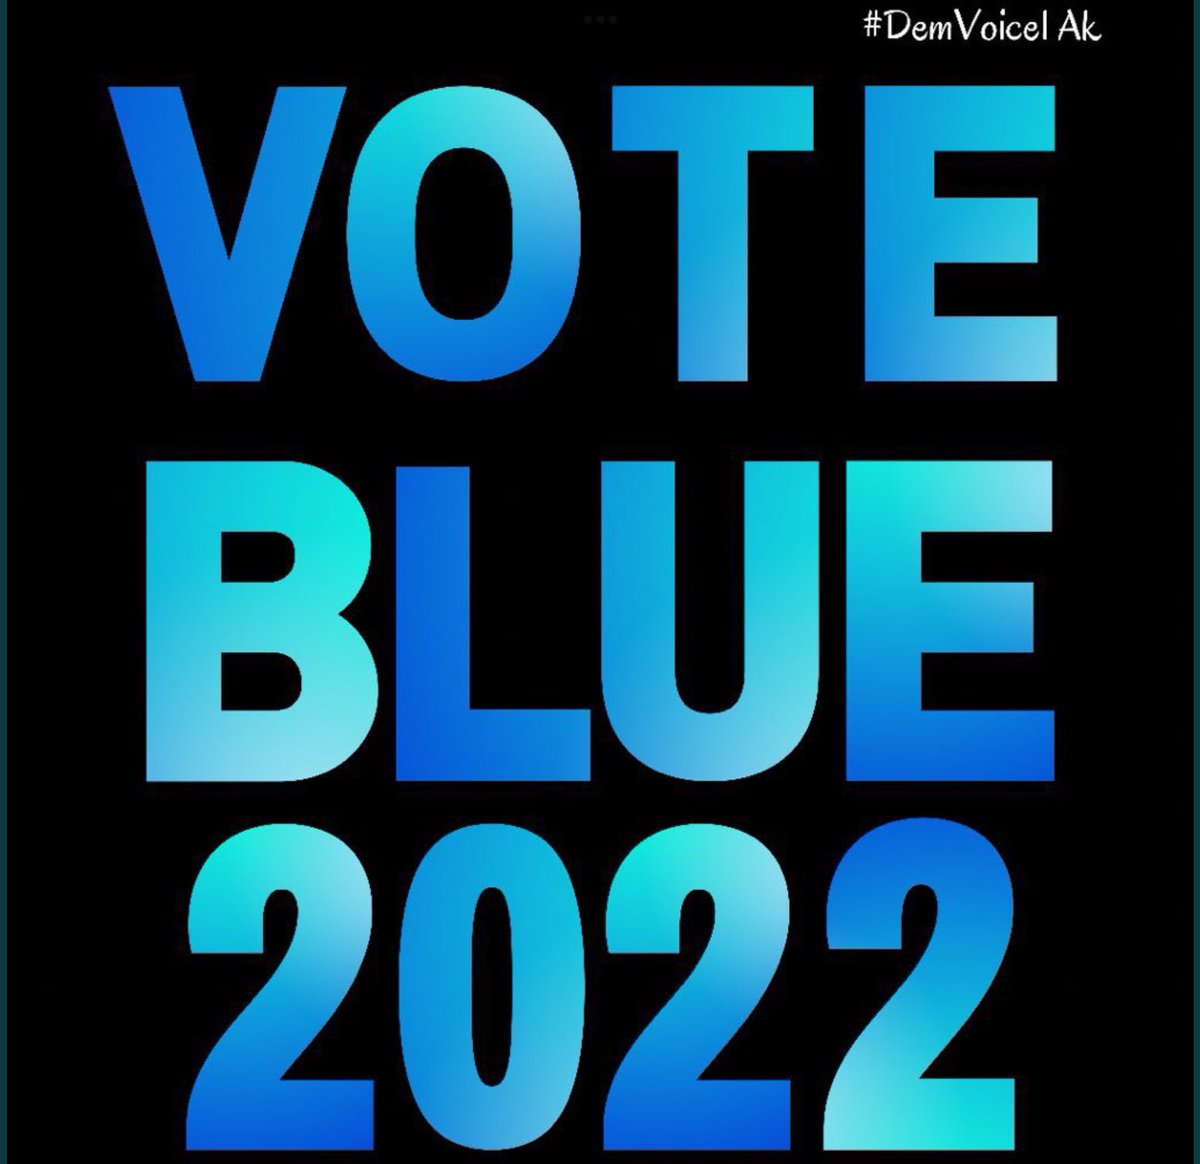 Calling all BLUE to help our President. He will have his veto pen ready, but we have the power so he doesn't have to use it. #Roevember8th 
#BlueCongress #VOTE 💙 #SaveOurDemocracy
#DemVoice1 #Dems4USA